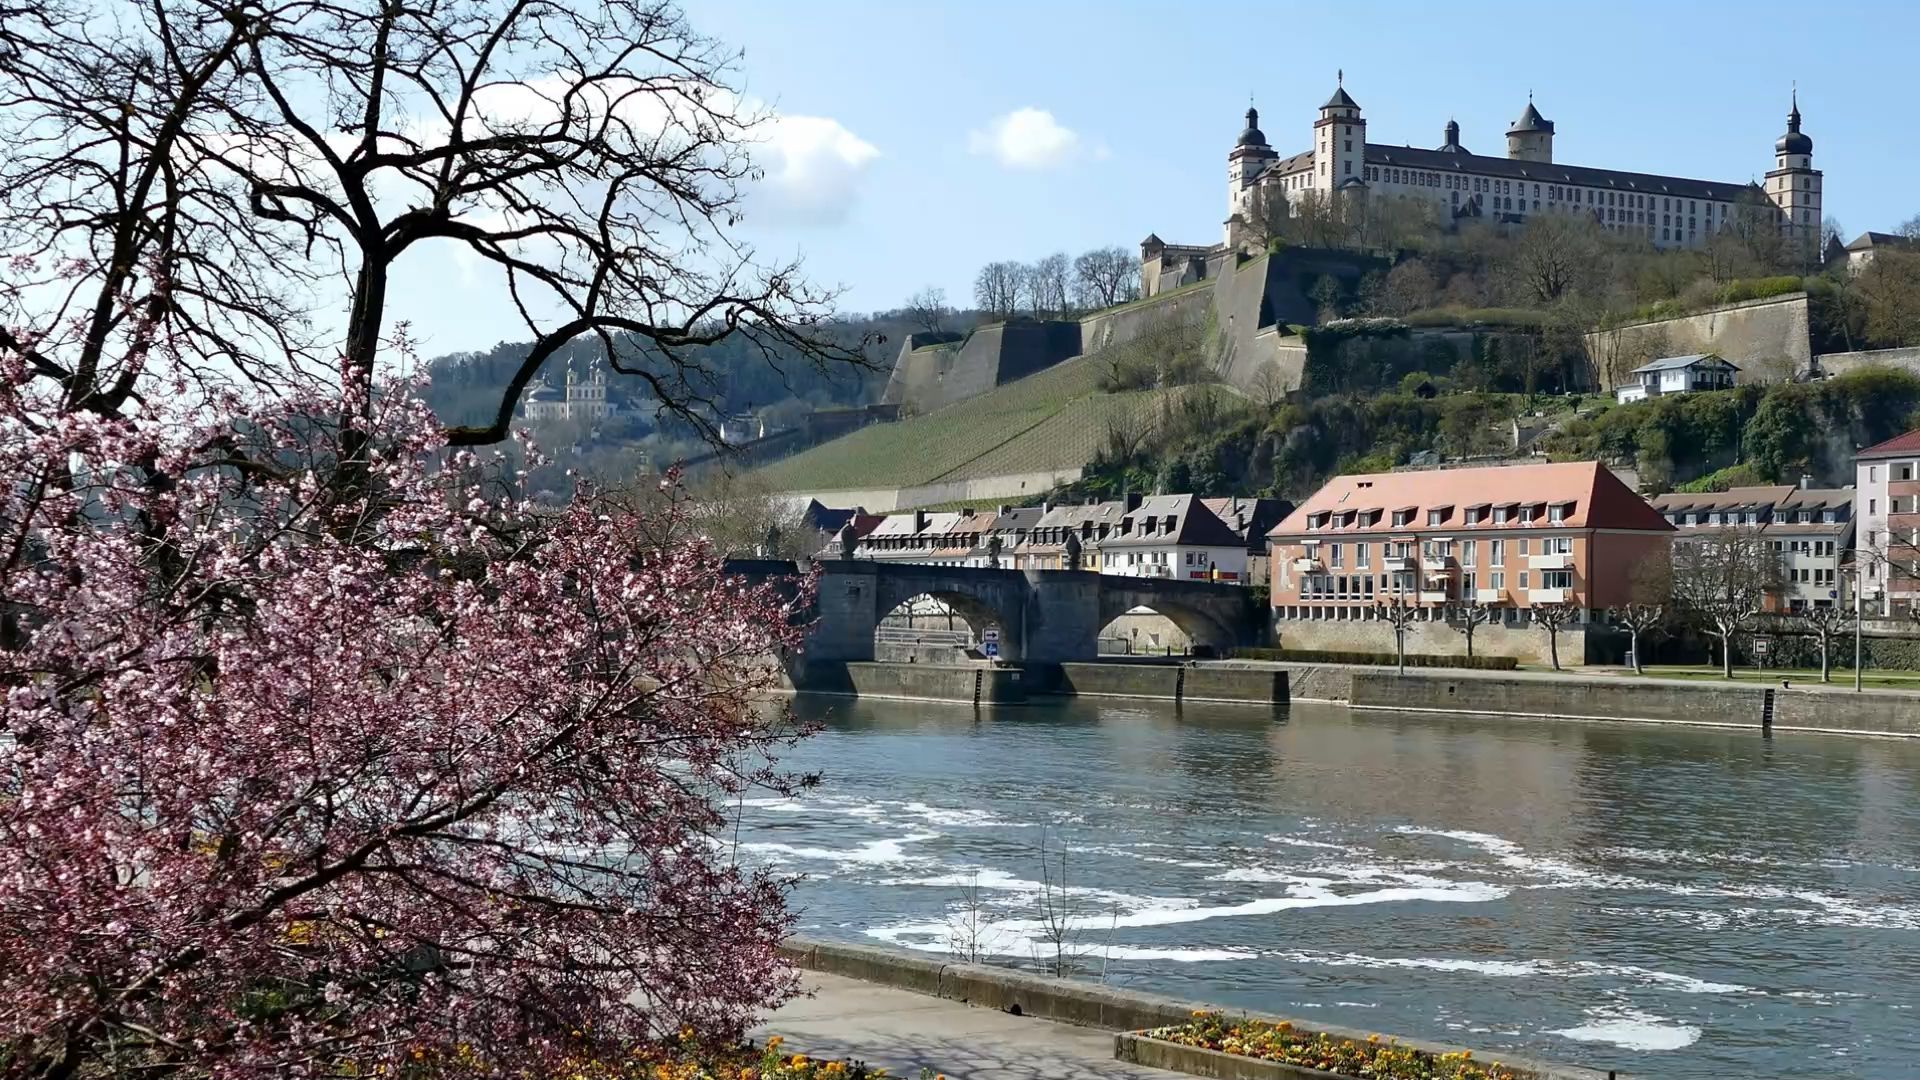 The wine metropolis of Würzburg on the May triangle